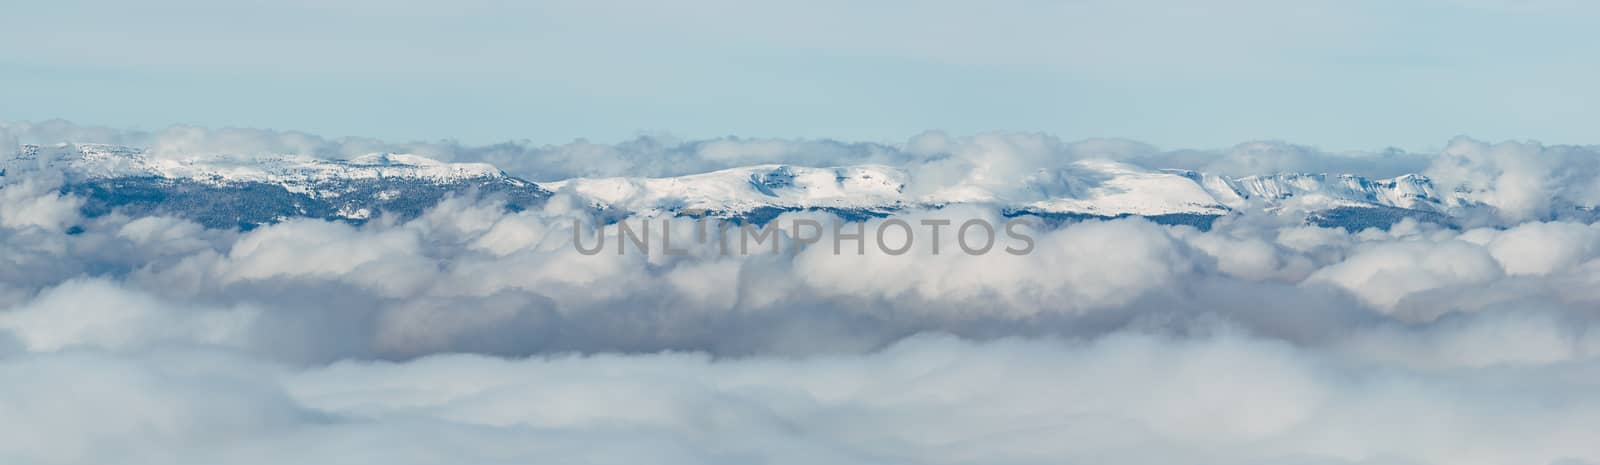 The Jura mountain emerging from the winter fog.